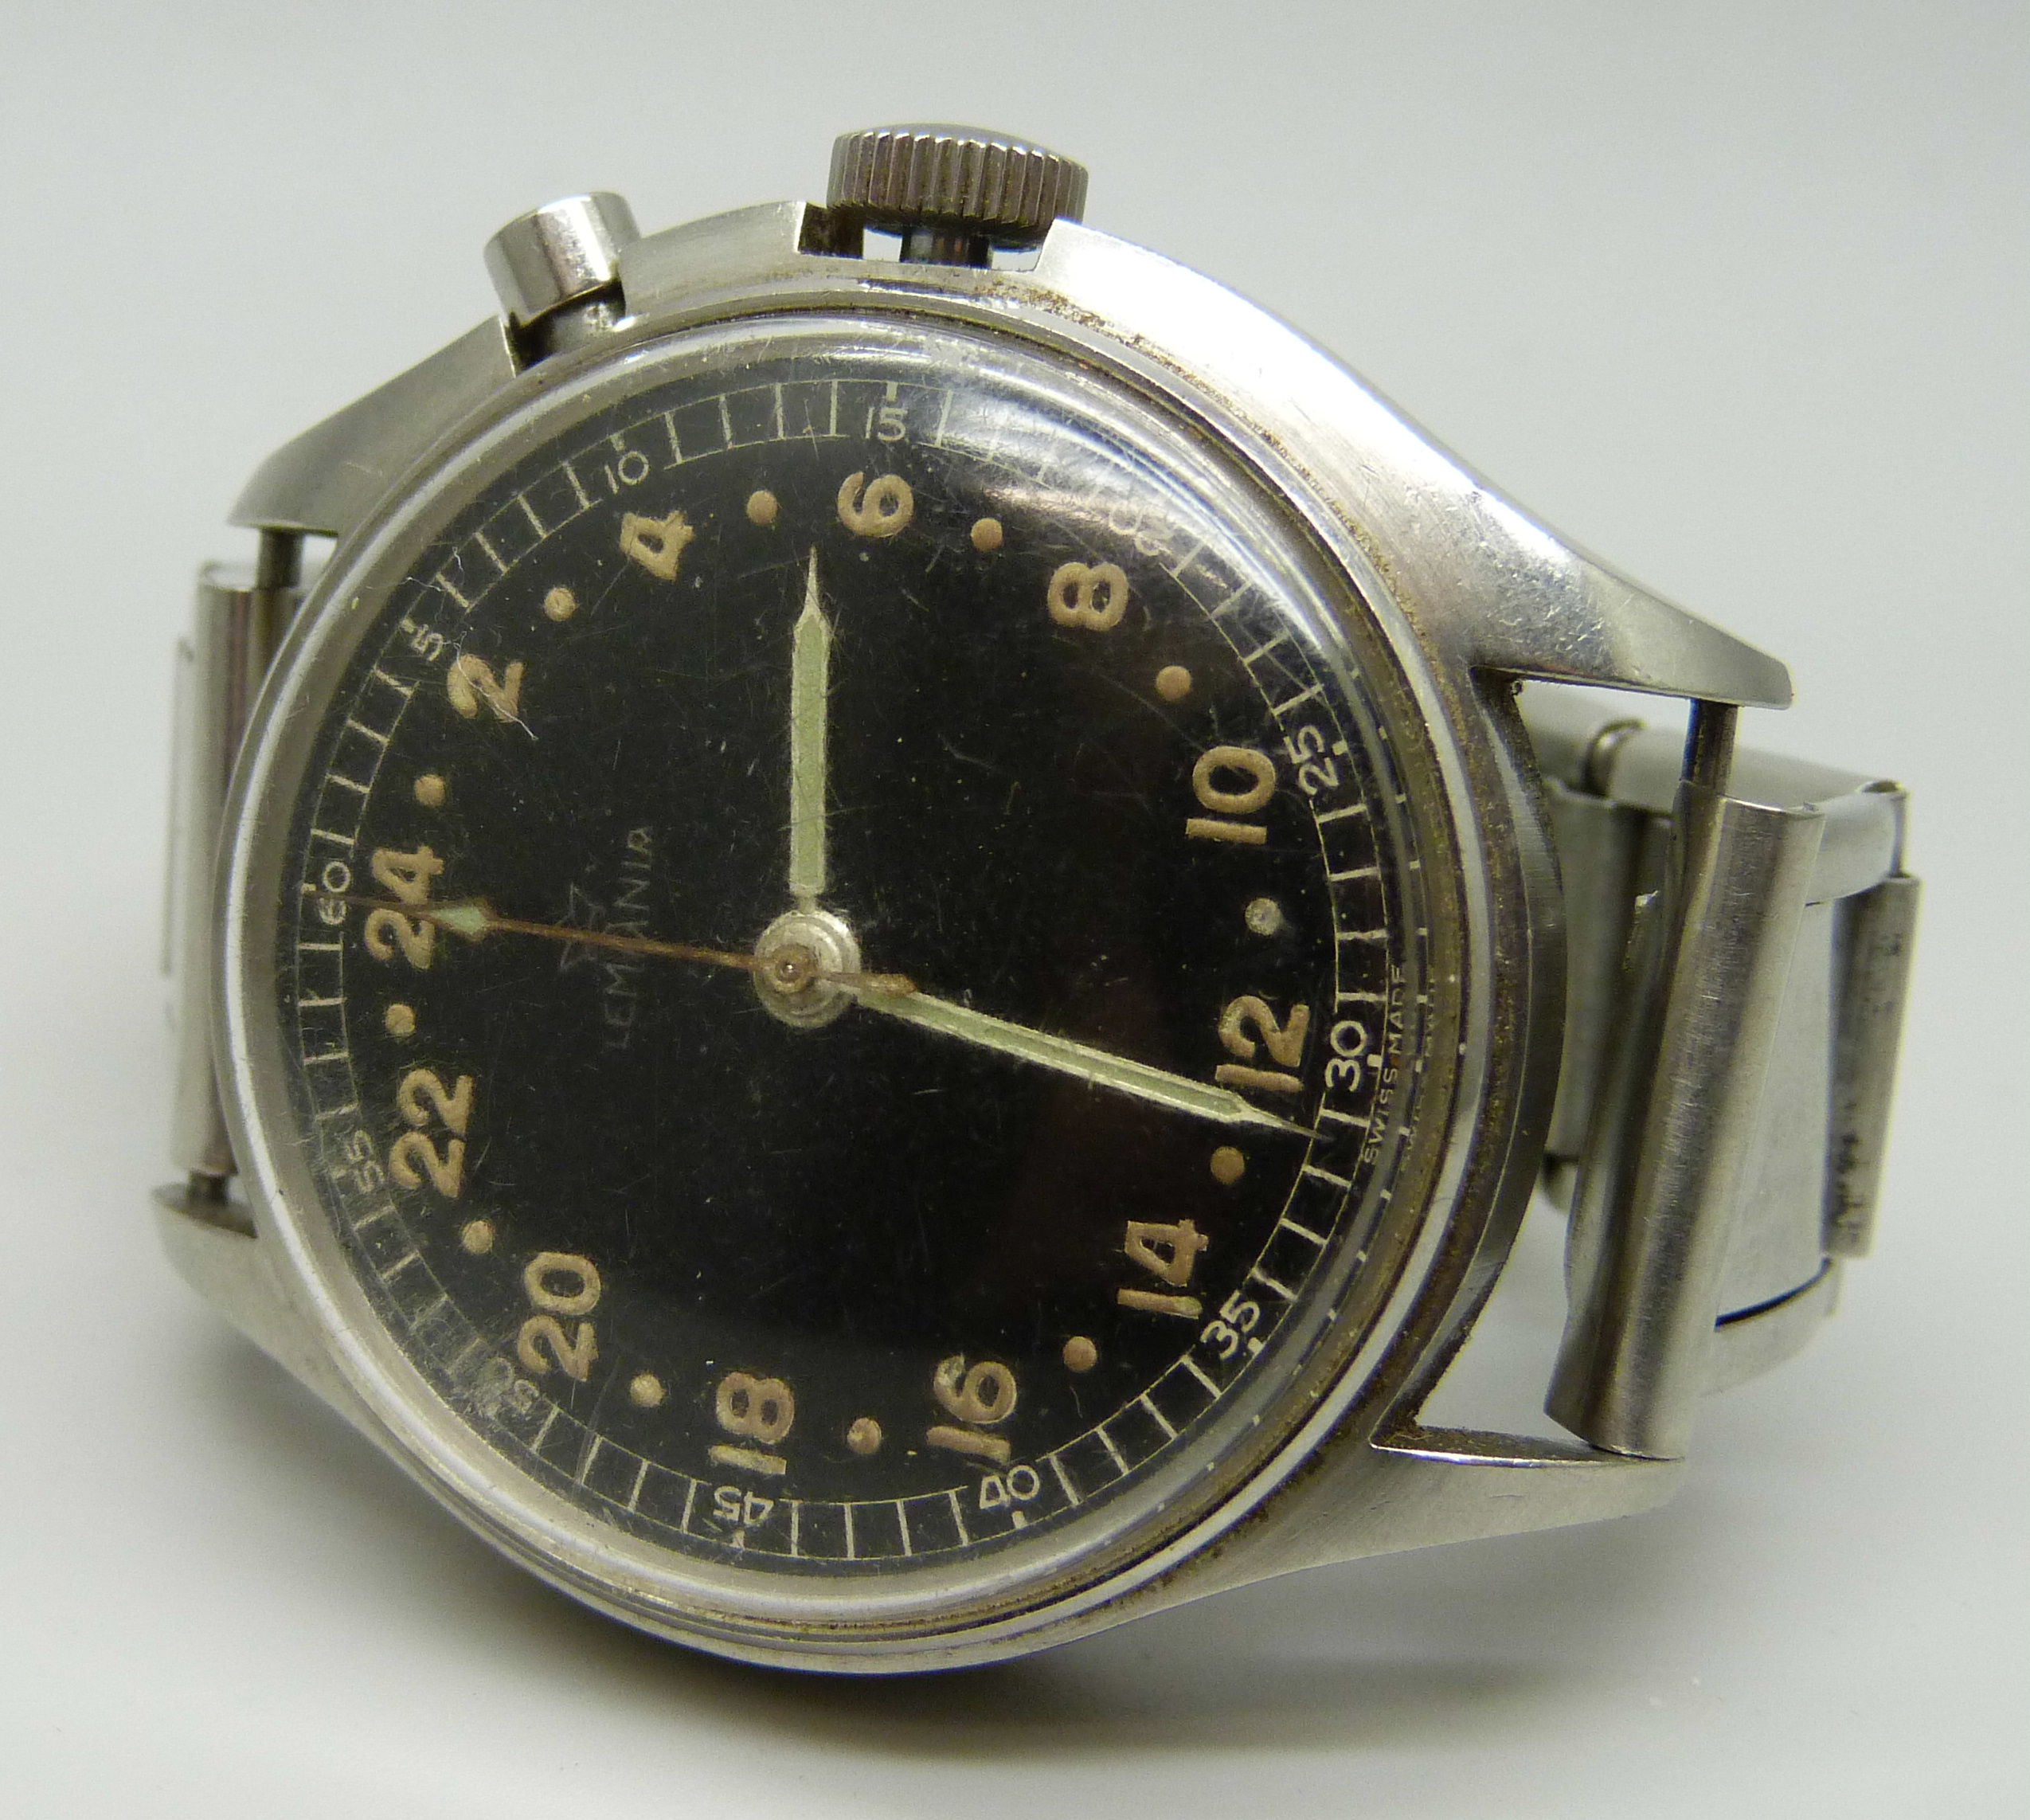 A German Lemania single button chronometer with 24-hour clock and sweep second hand, 39mm case - Image 5 of 5